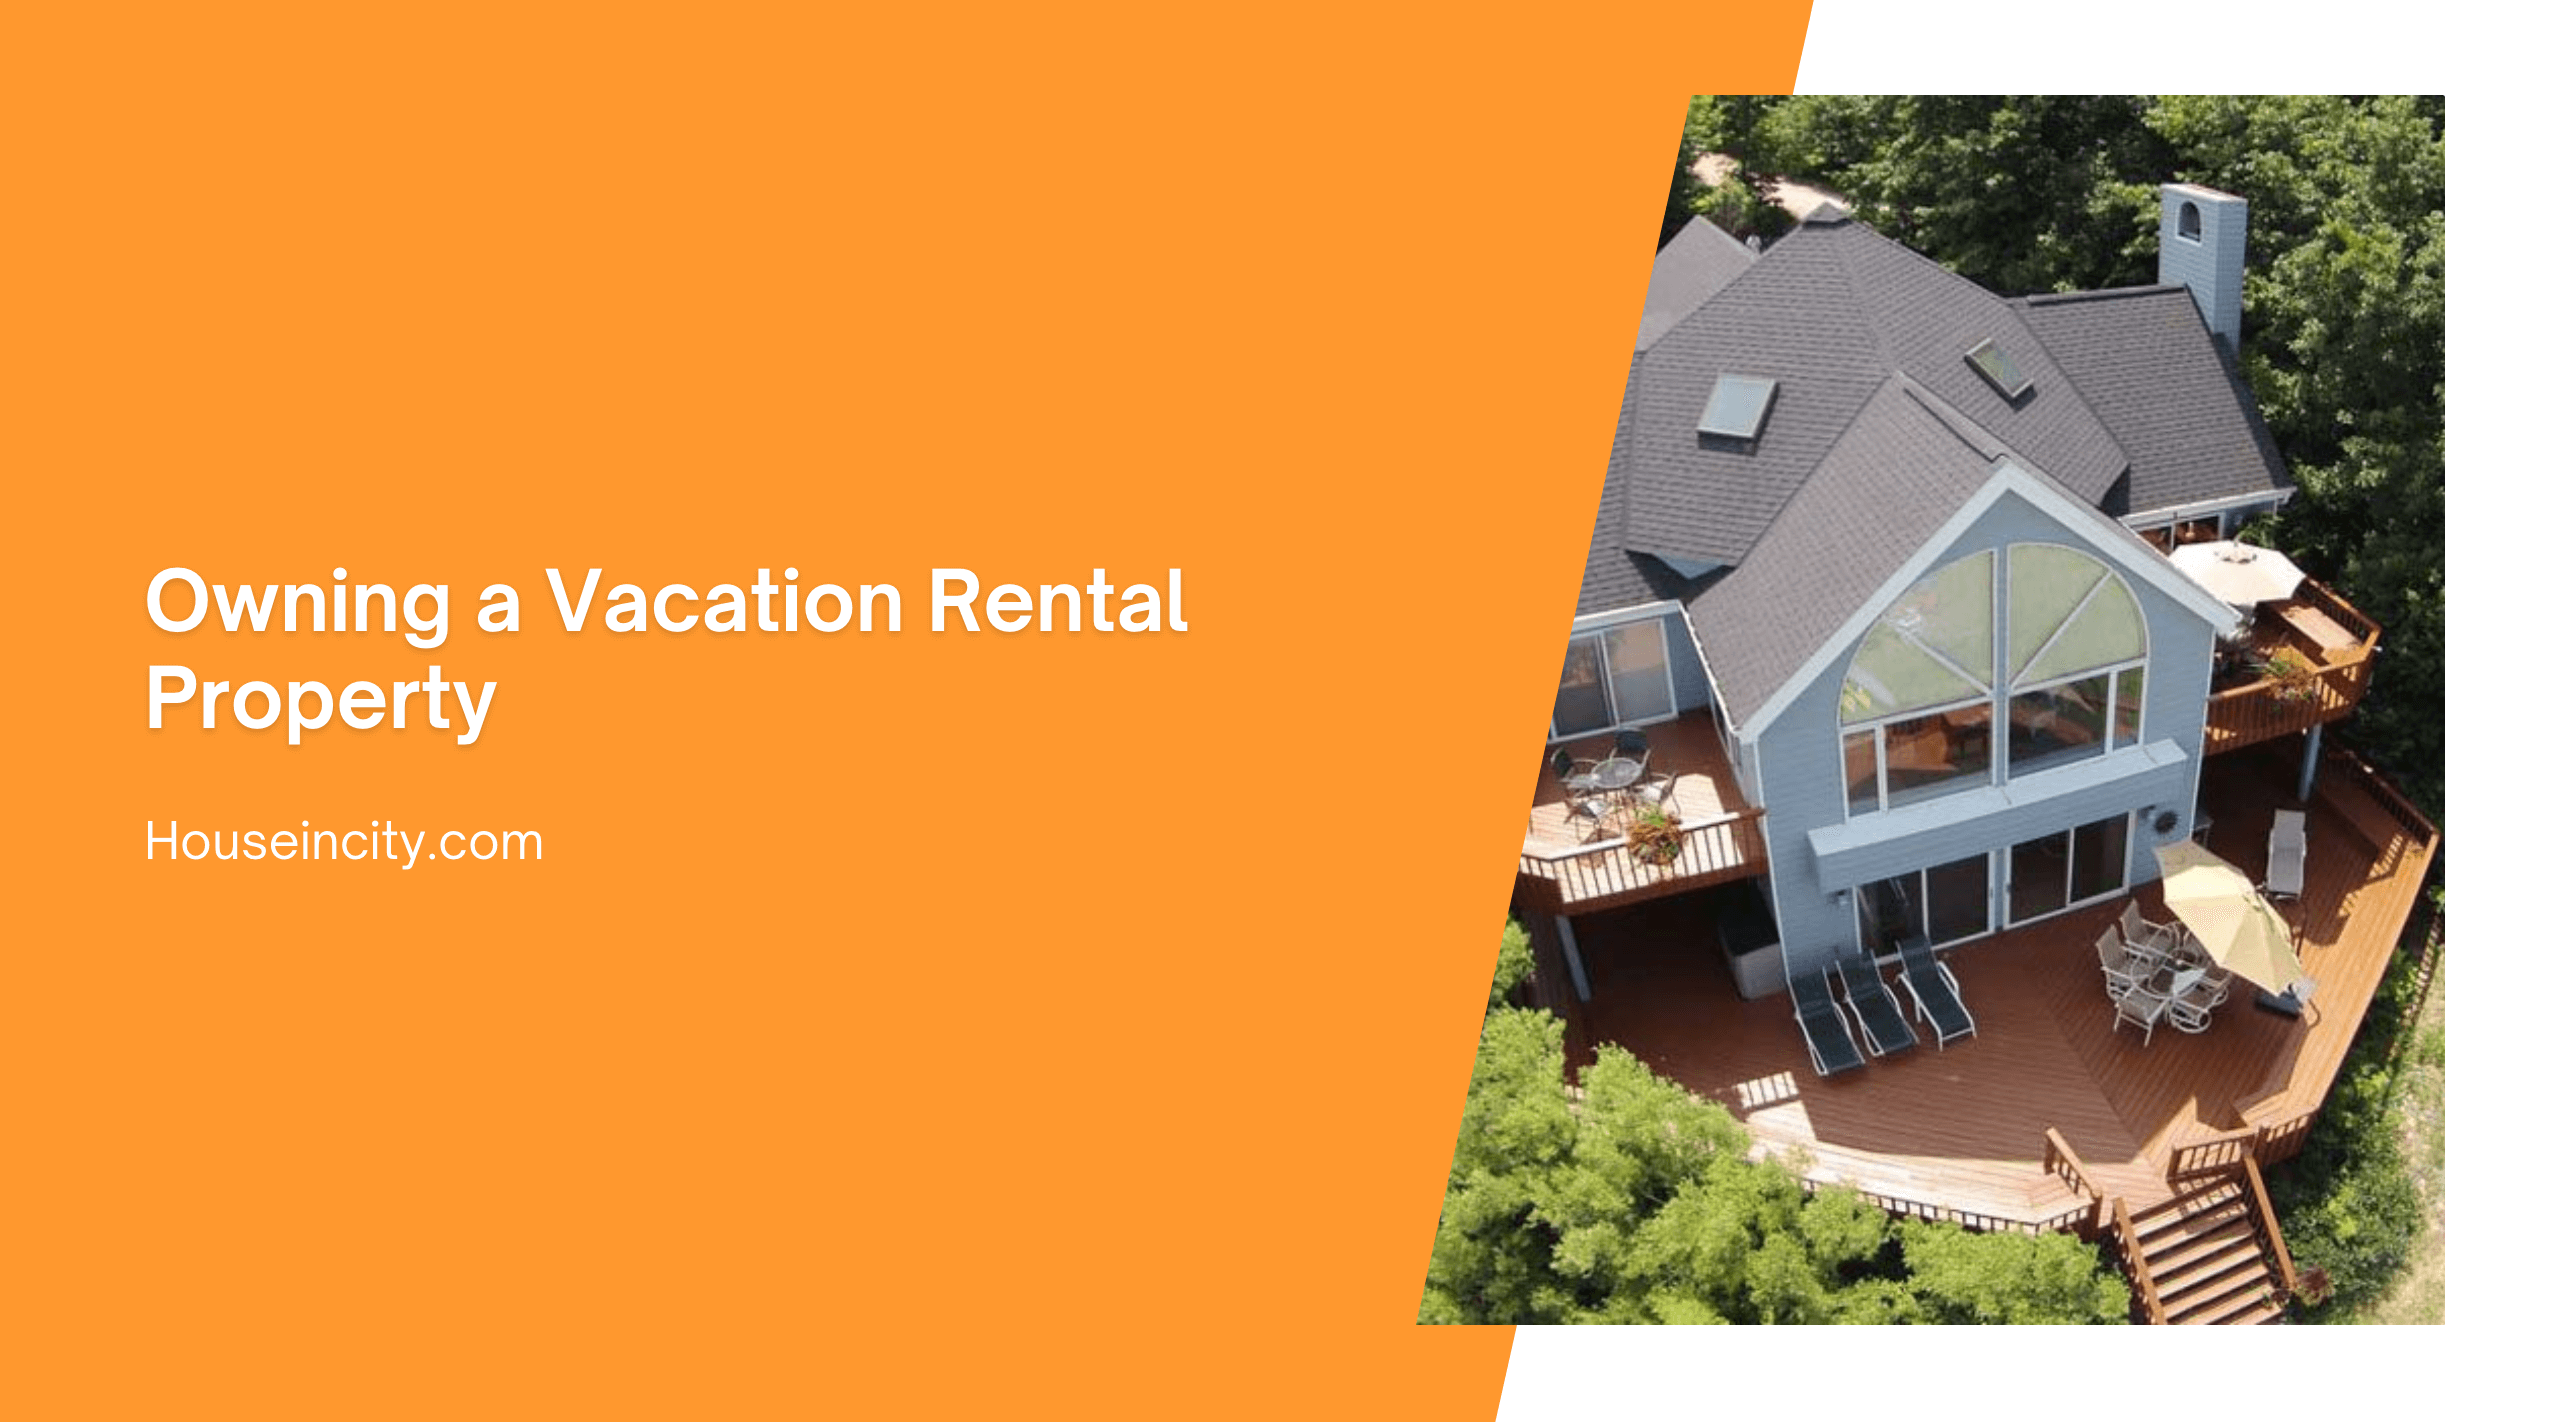 Owning a Vacation Rental Property